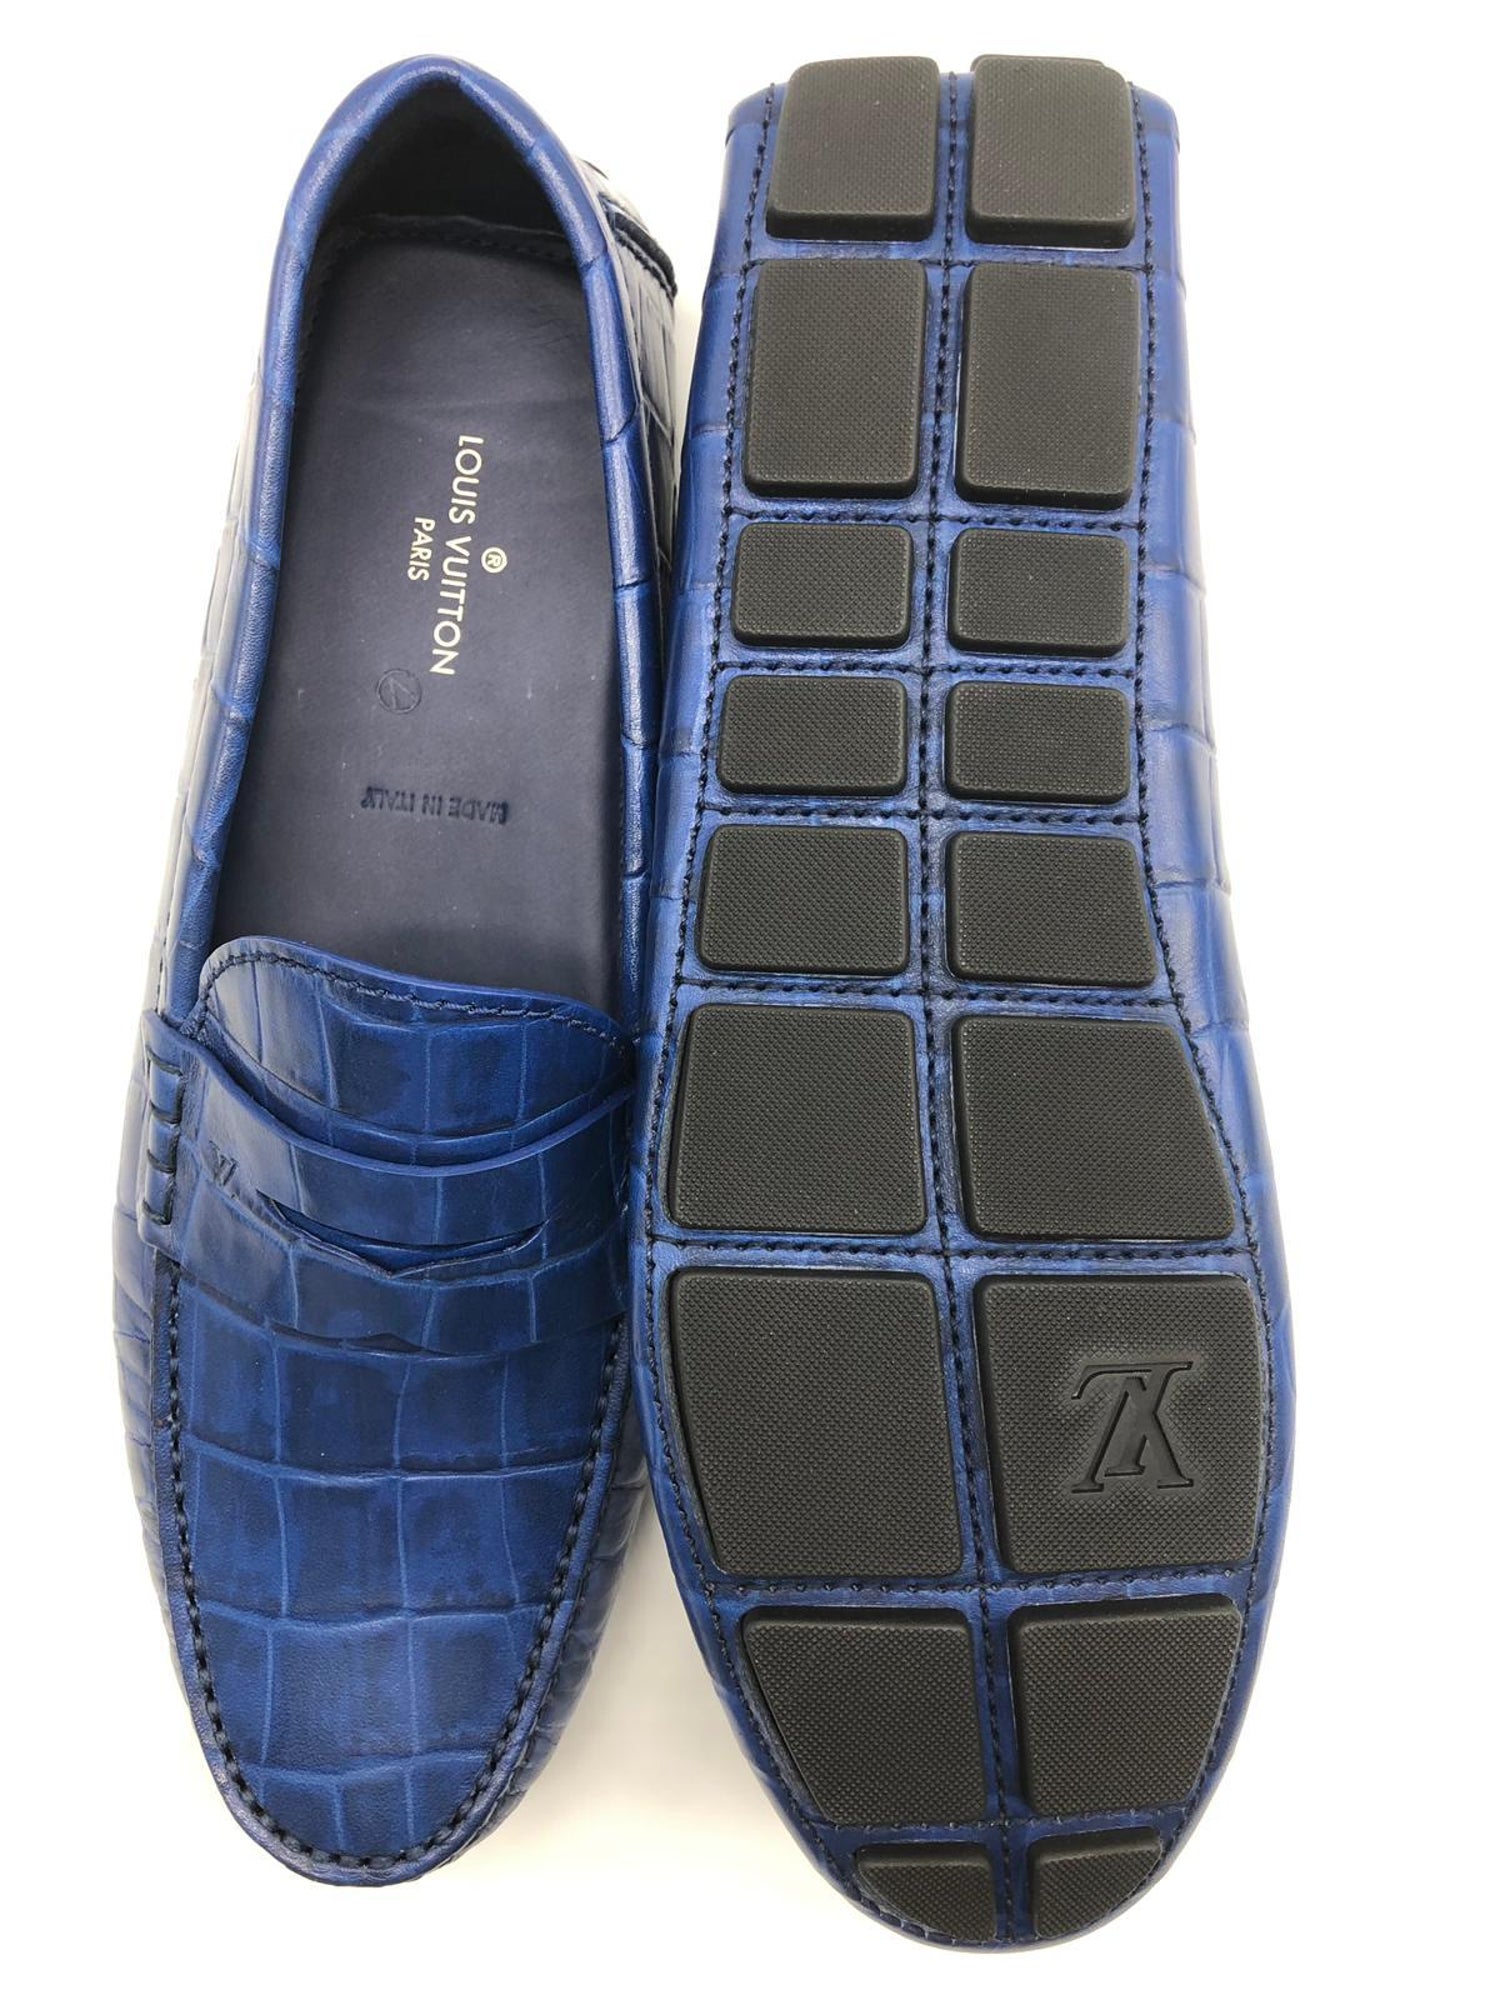 faglært talsmand hagl Louis vuitton Men Loafers in blue crocodile stylished leather// New! at  1stDibs | louis vuitton crocodile shoes, louie loafers, lv crocodile shoes